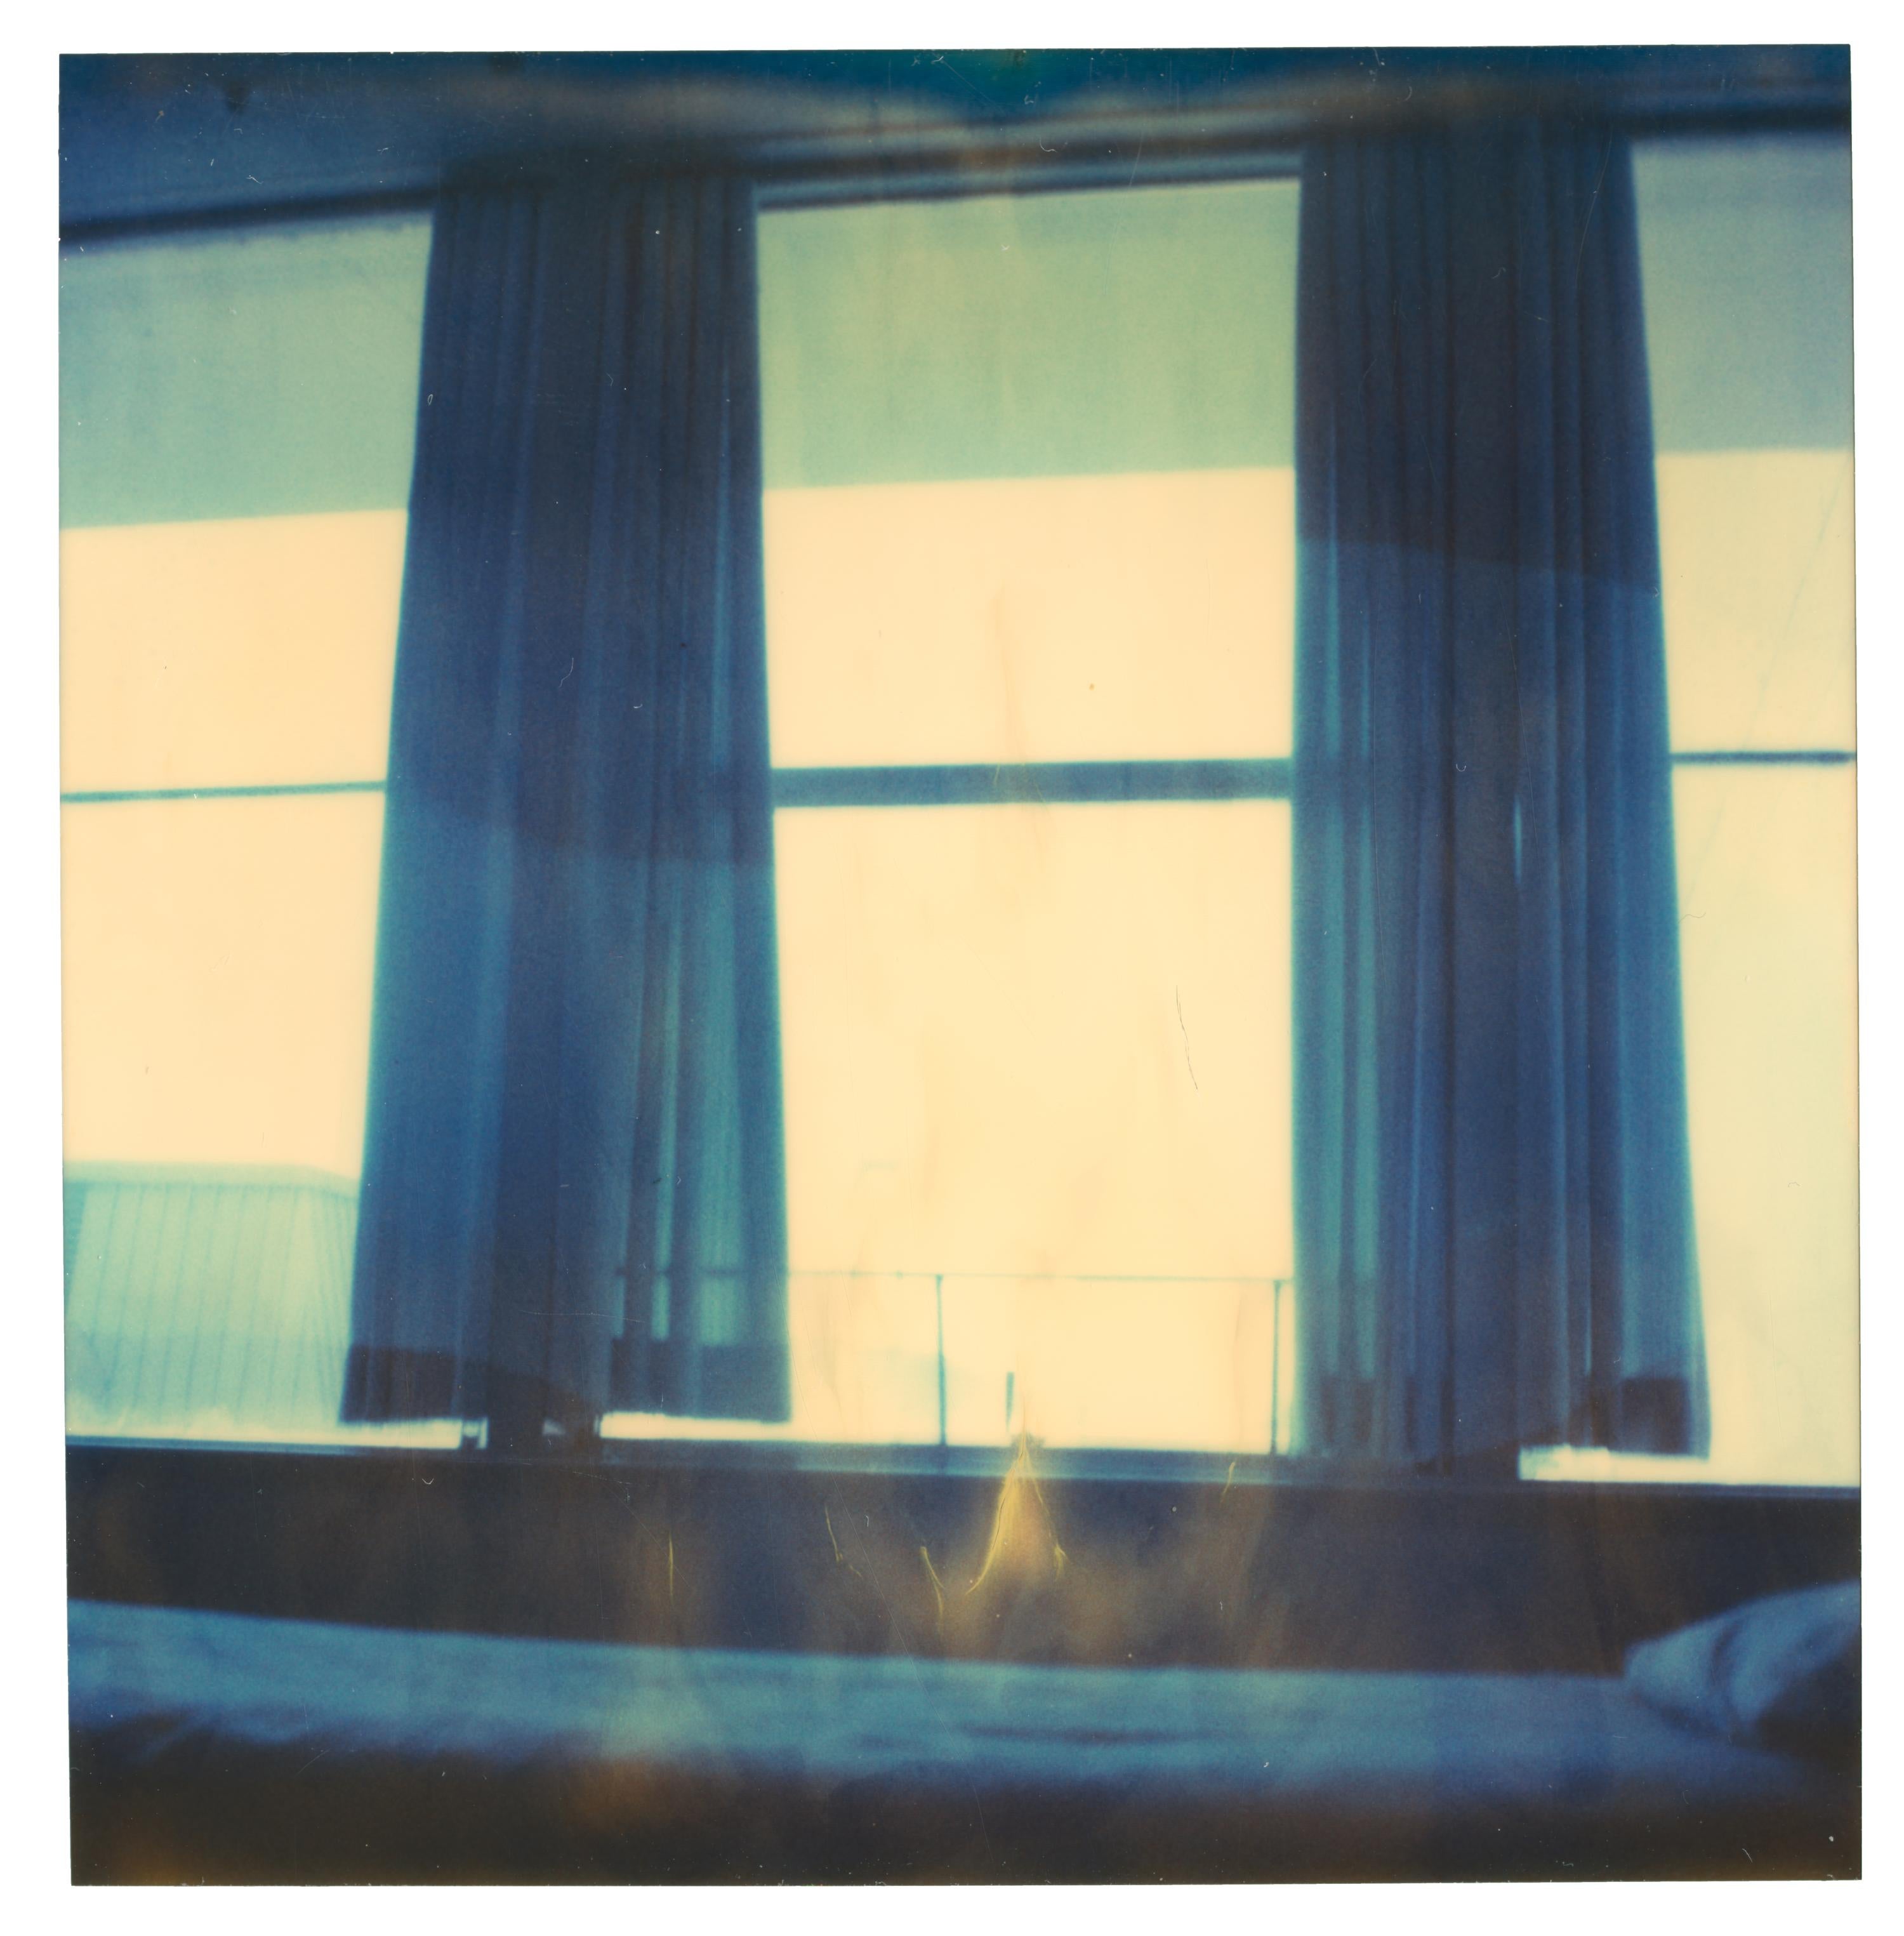 A Room with no View (Burned) - Polaroid, Contemporary, 21st Century, Portrait